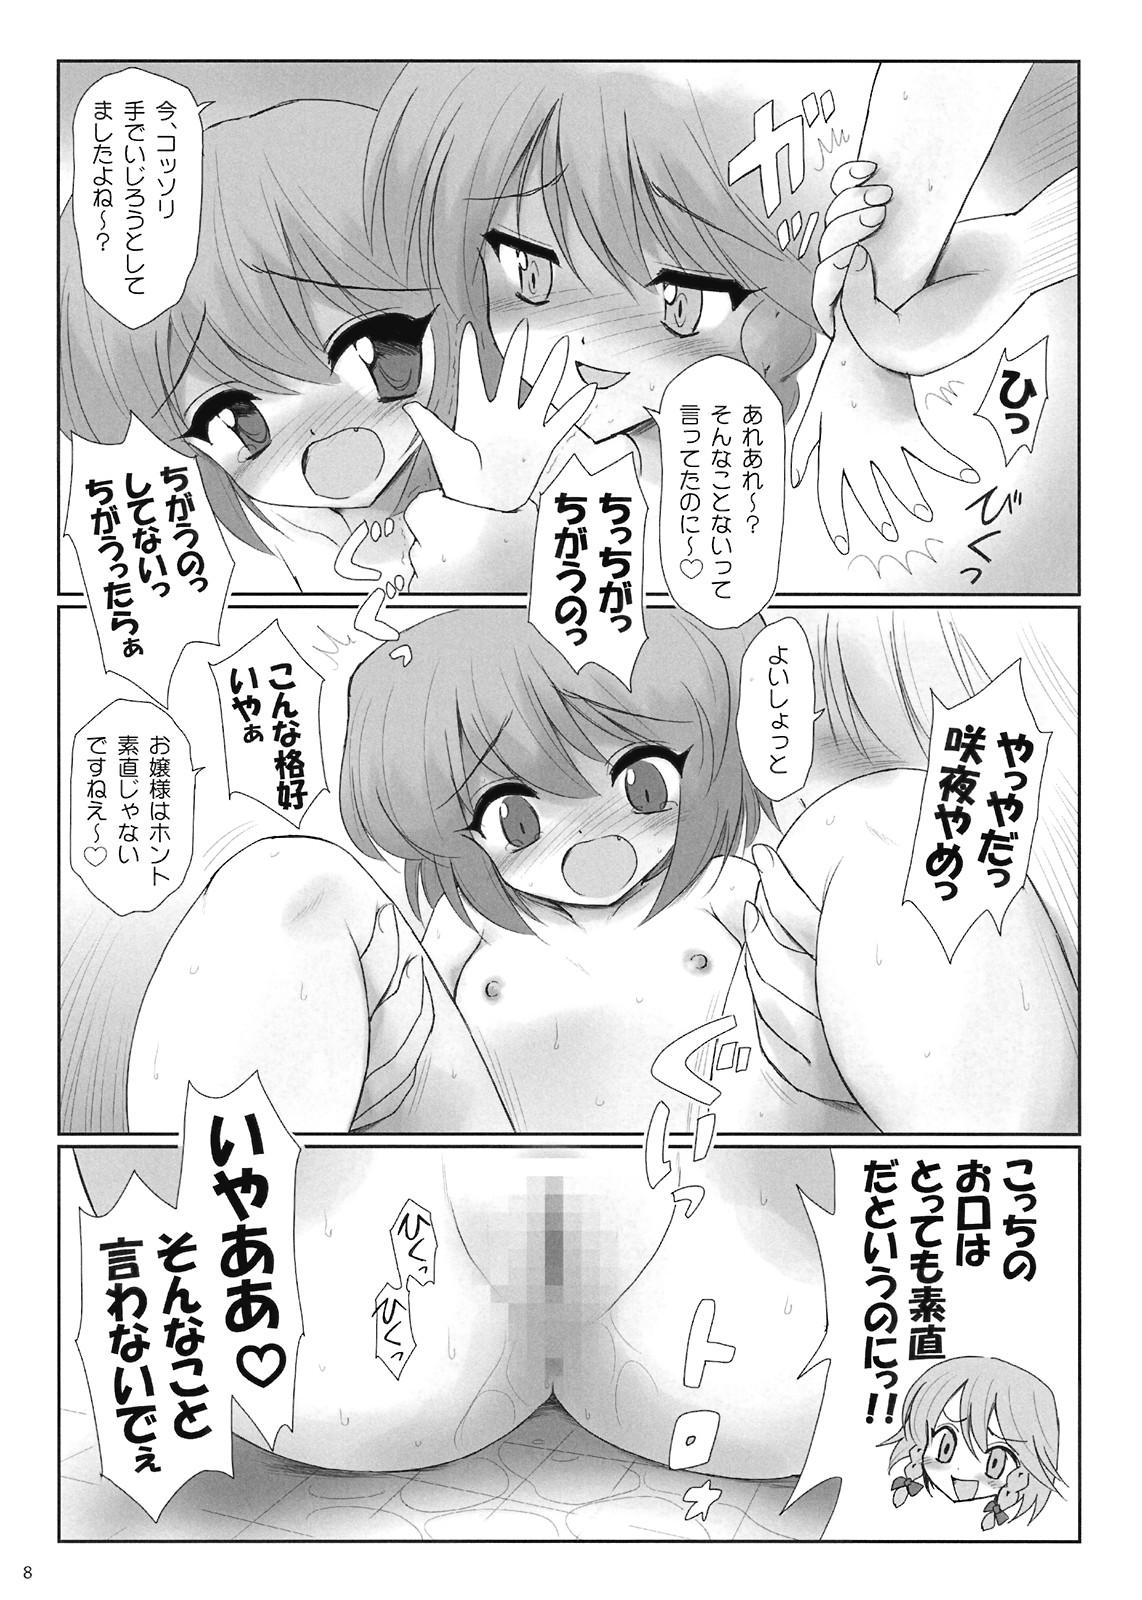 Nut コピー本 - Touhou project Hot Blow Jobs - Page 8